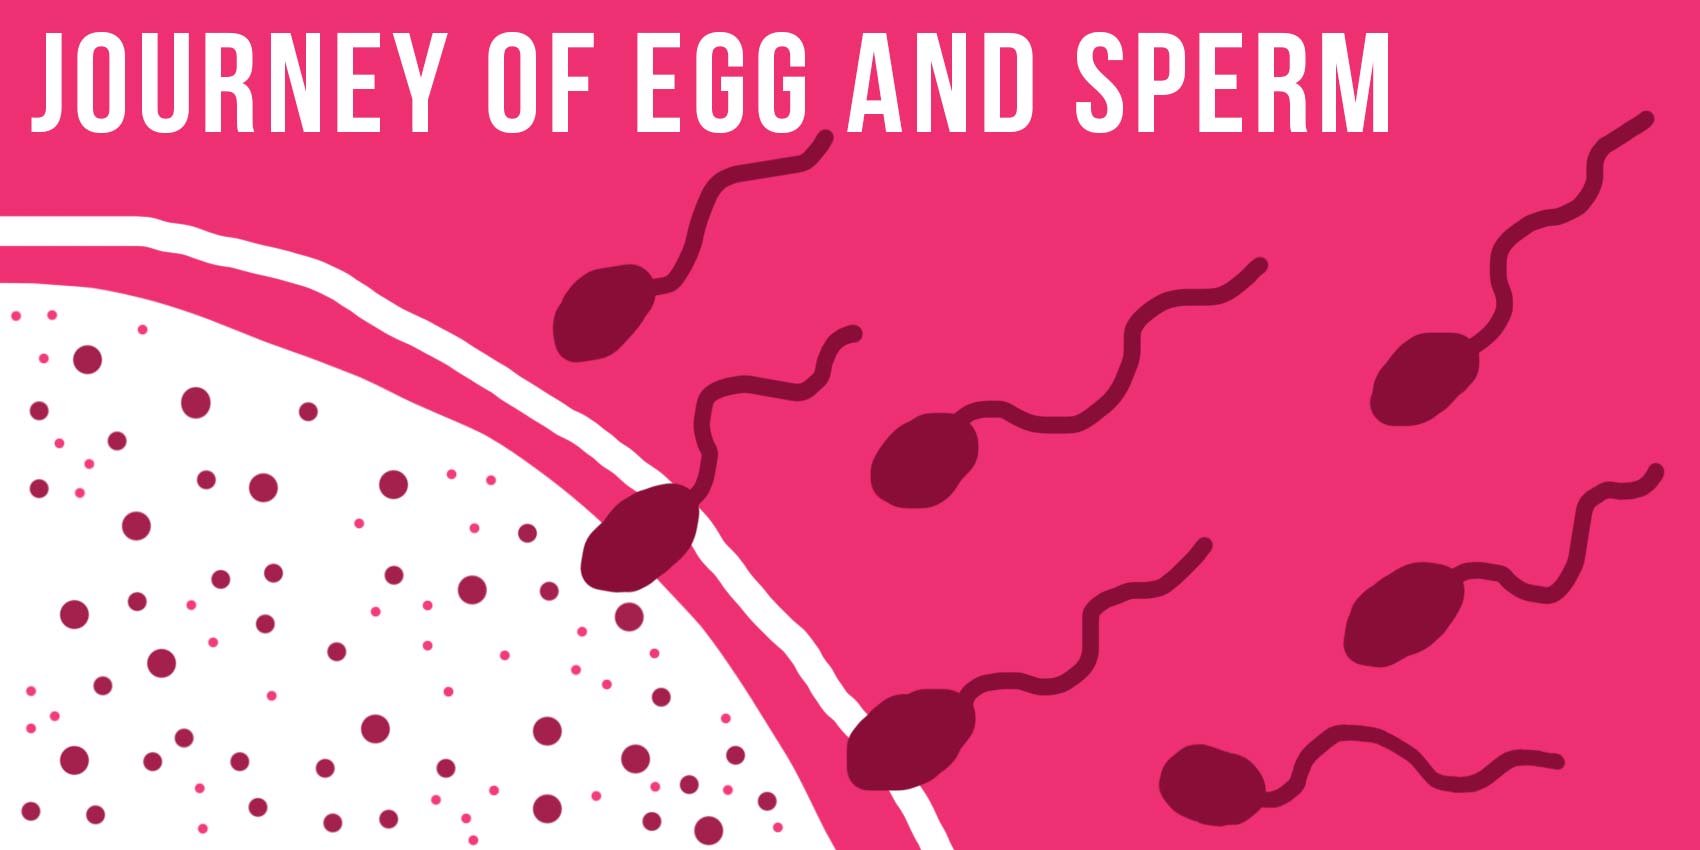 Your Self Series The journey of egg and sperm photo